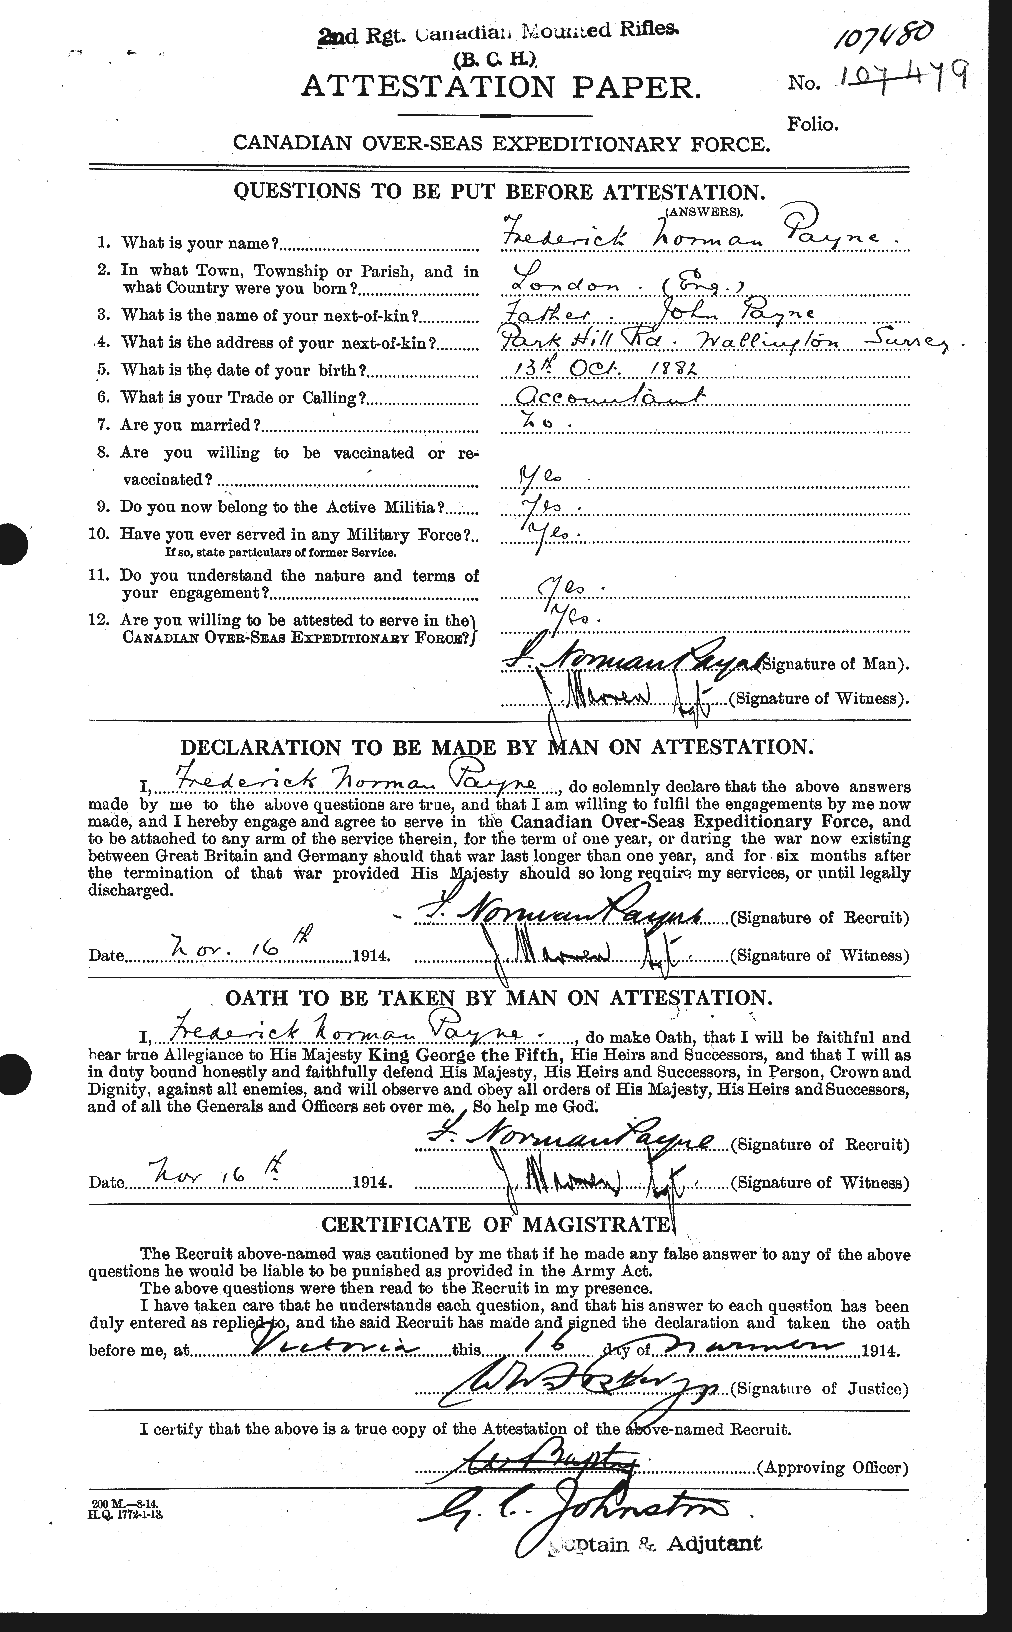 Personnel Records of the First World War - CEF 569915a